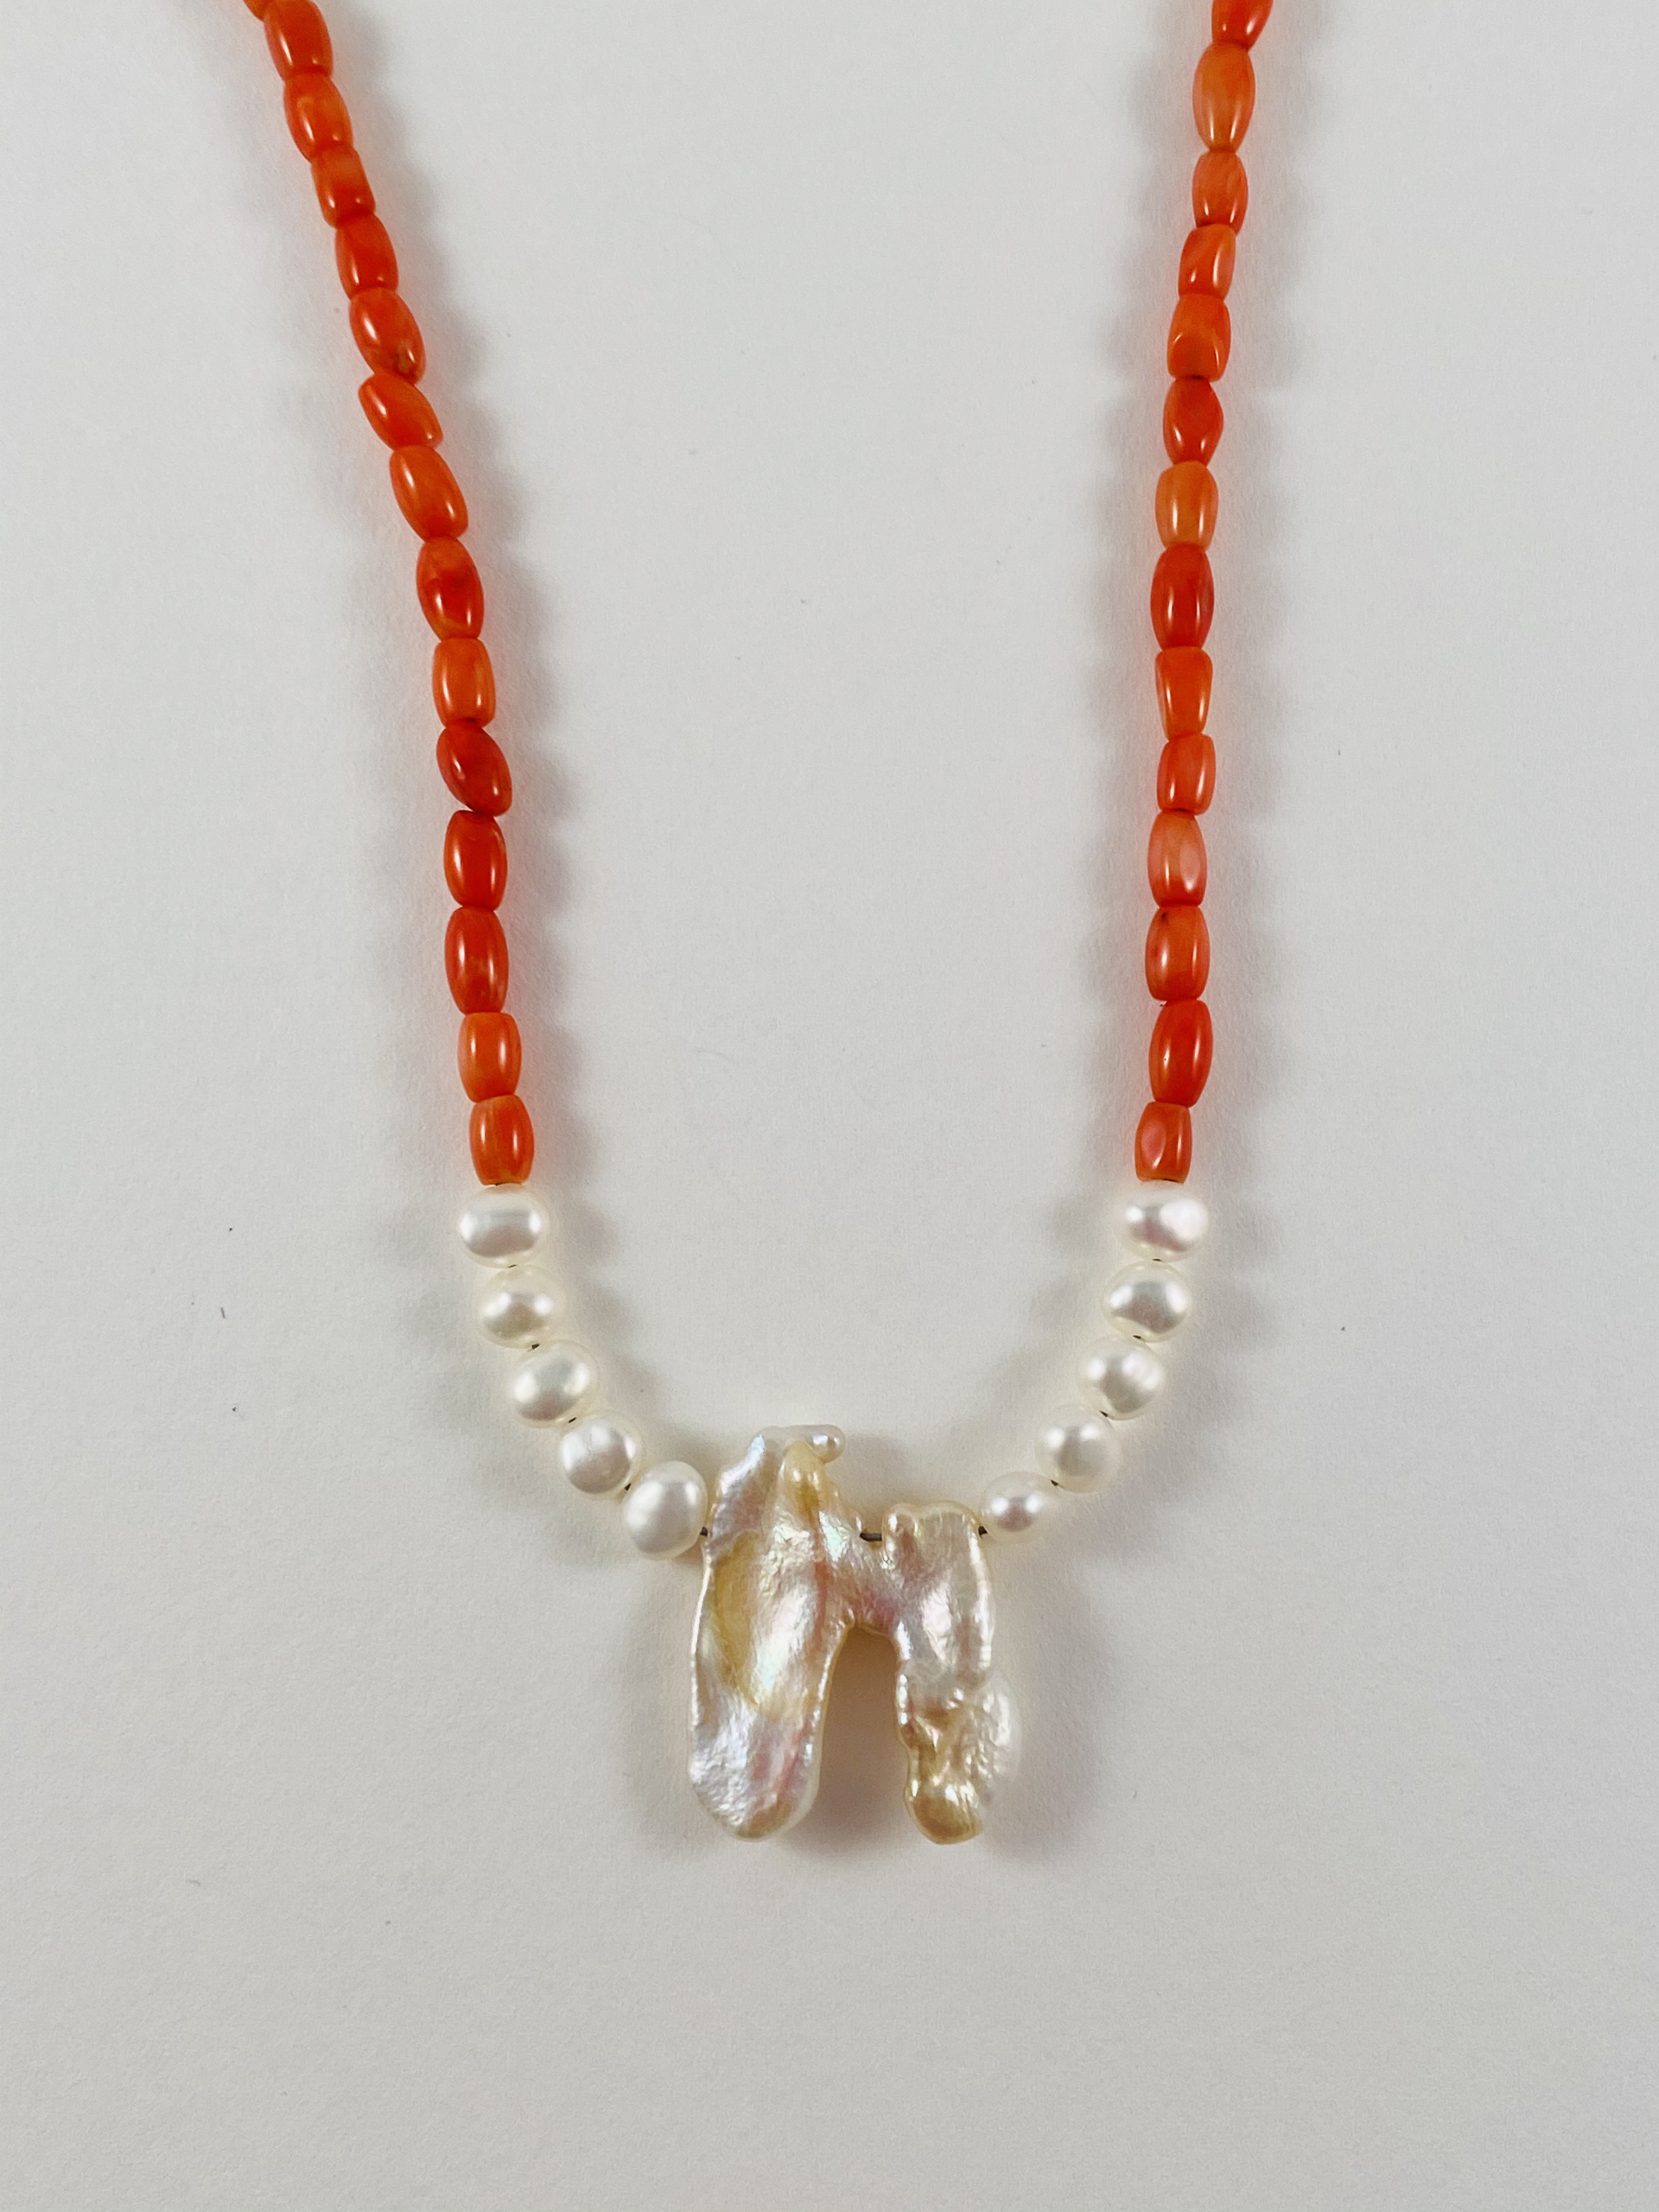 Coral Beads, White Pearls (FW) Necklace, natural formed pearl pendant by Nance Trueworthy